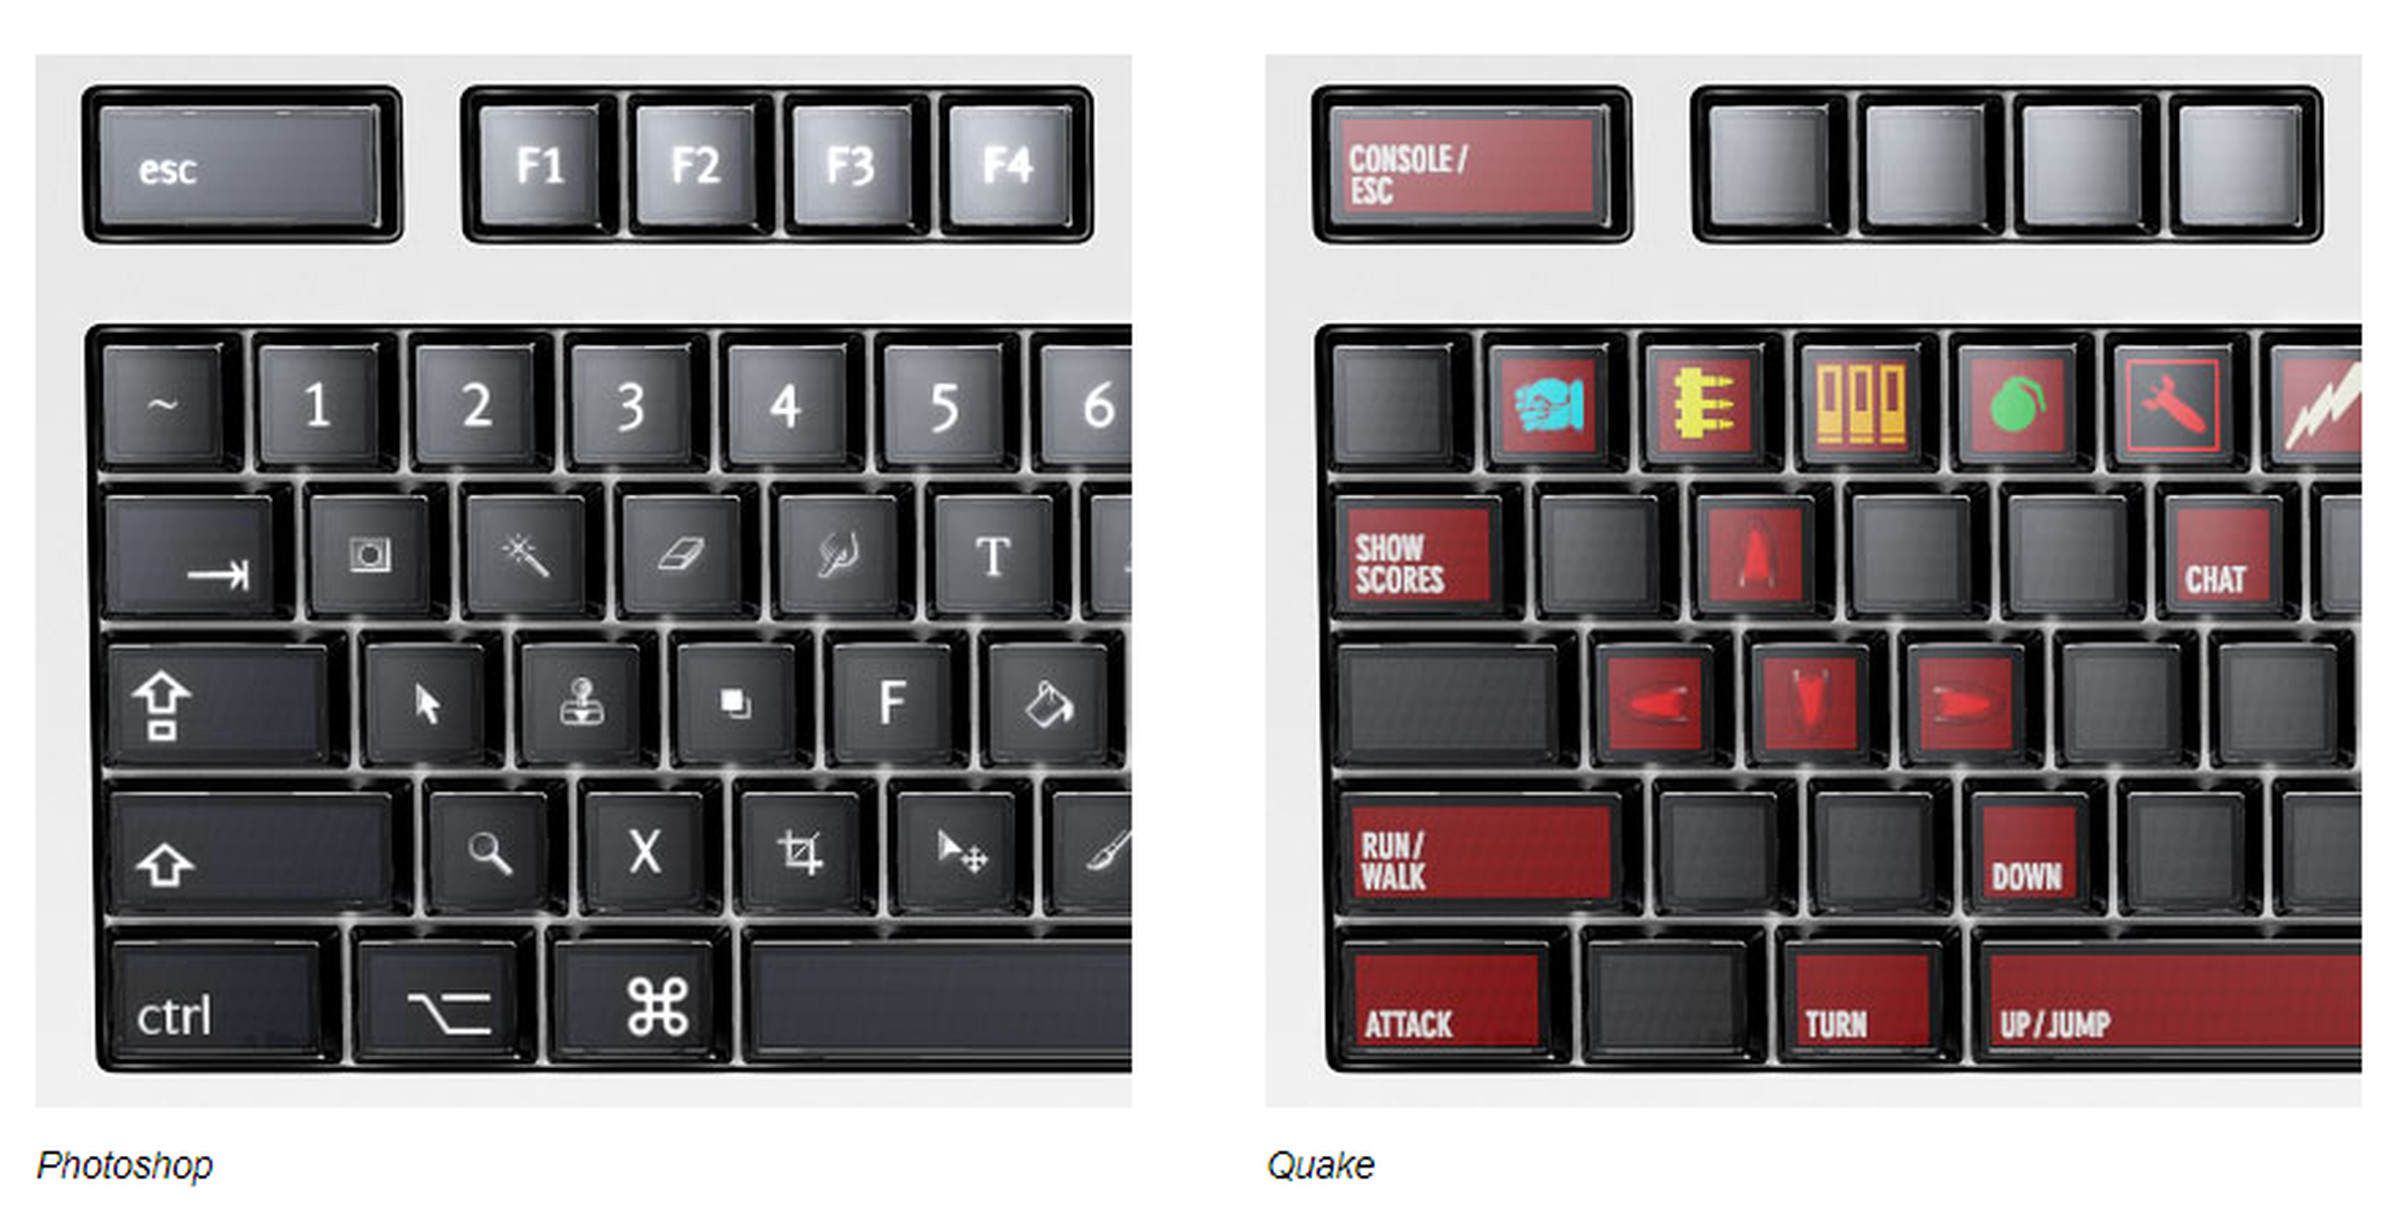 Left: a Photoshop layout. Right: a Quake layout with fewer keys used.